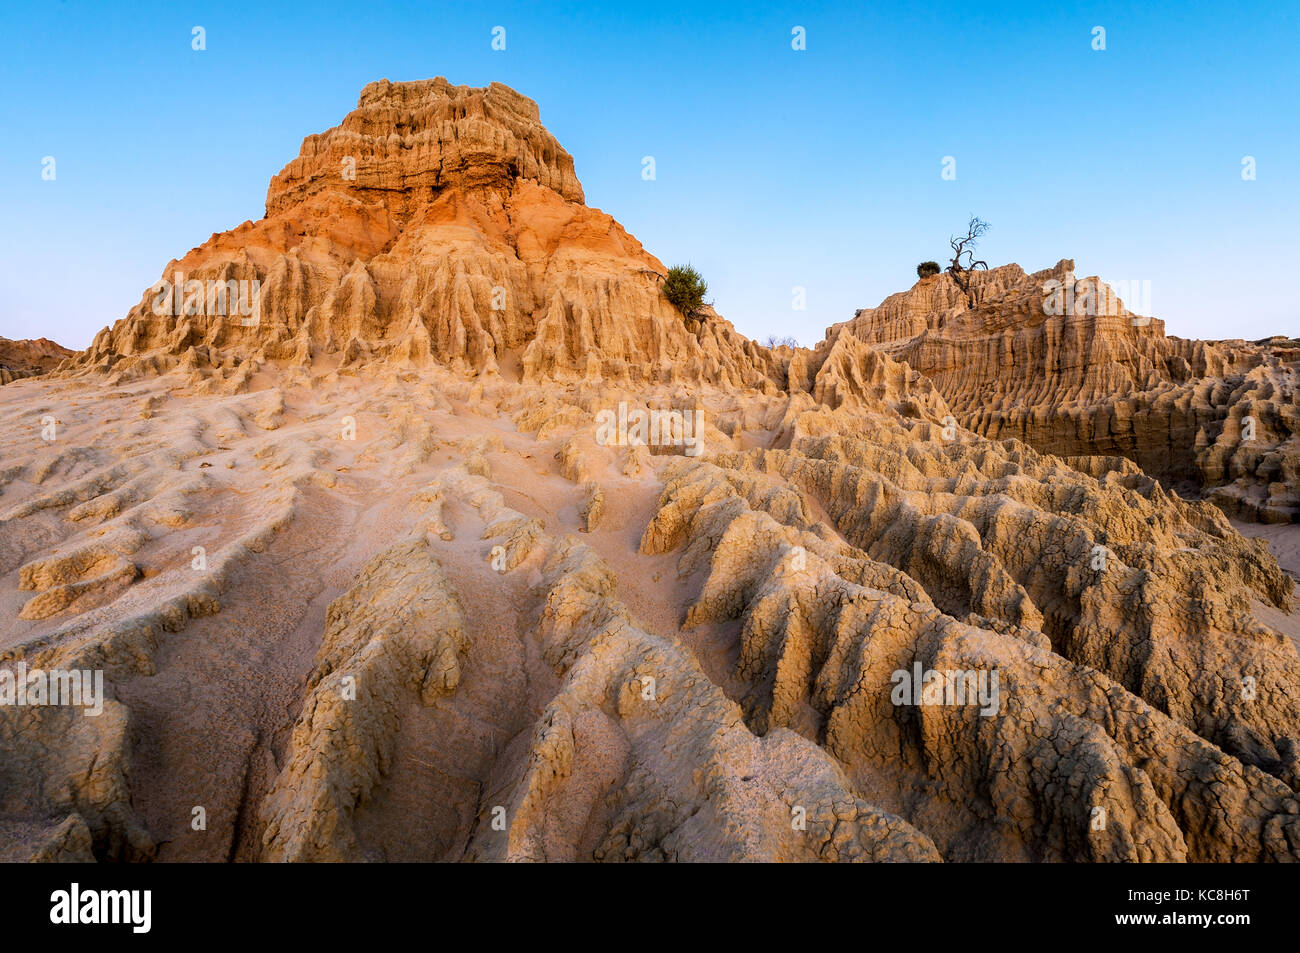 Sand dune formations of the Walls of China in Mungo National Park. Stock Photo